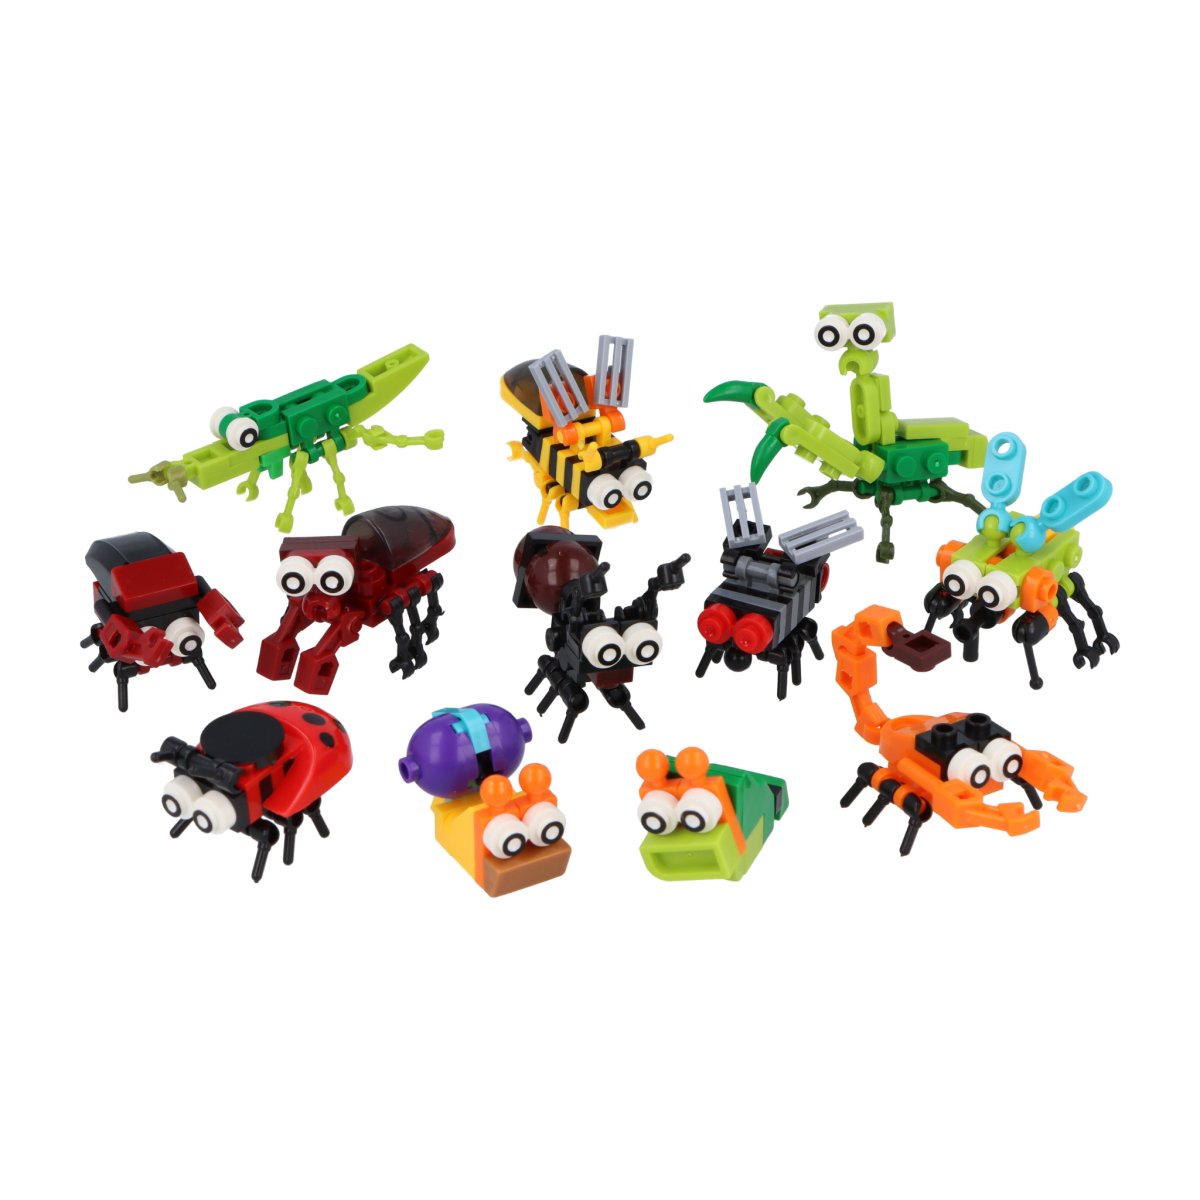 Insect Brick Kits - Kids Party Craft